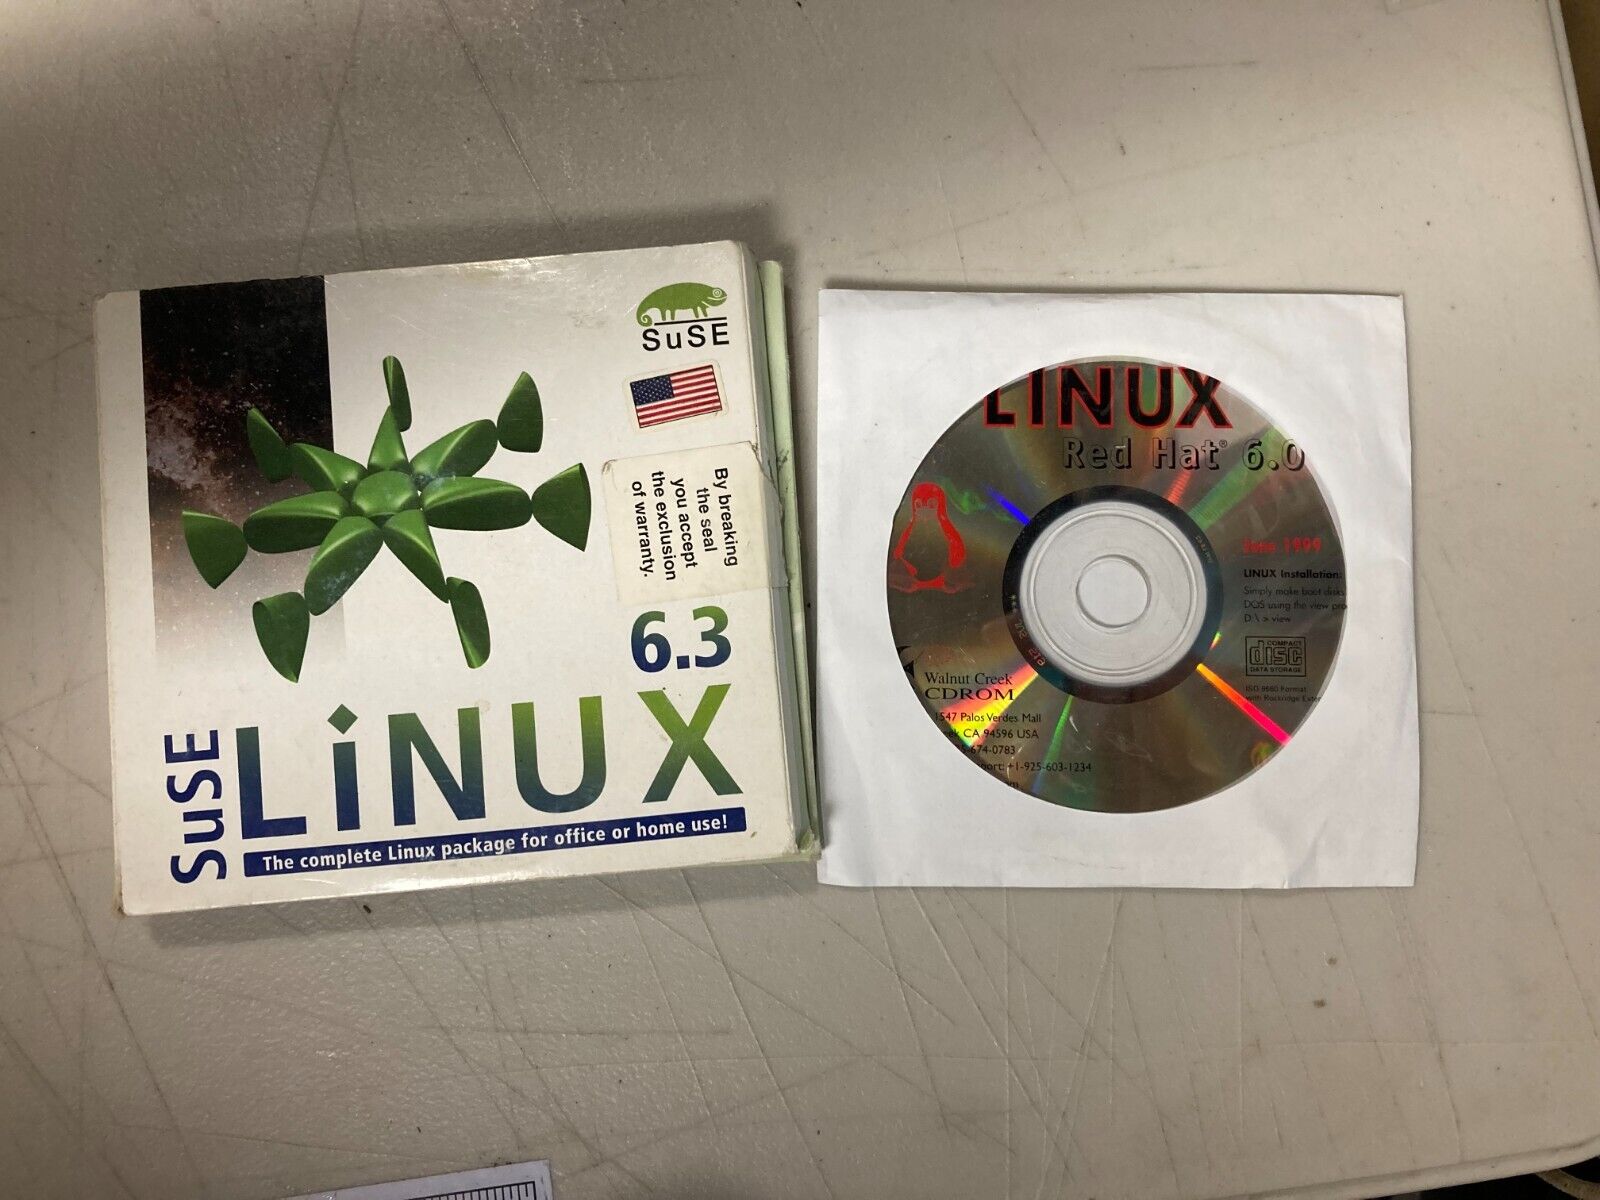 SuSE Linux 6.3 Vintage Operating System 6 Discs Home or Office + Red Hat 6.0